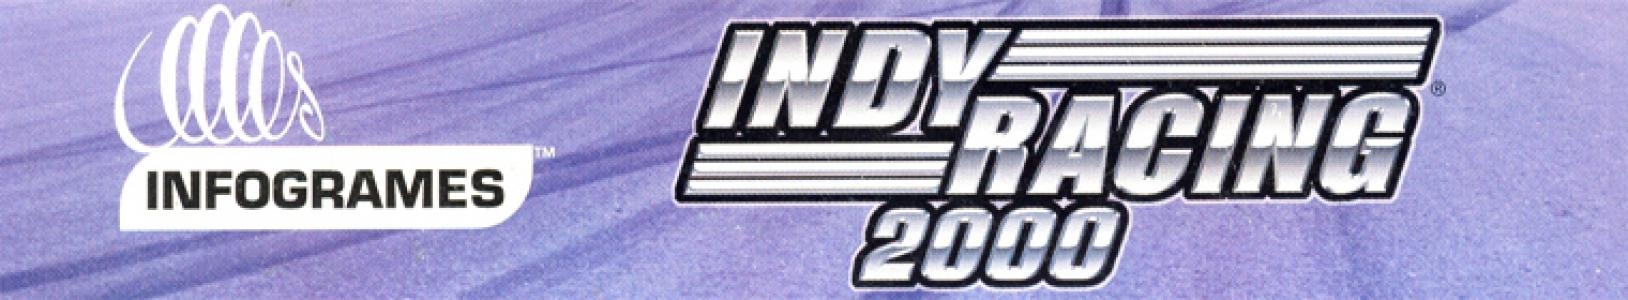 Indy Racing 2000 banner